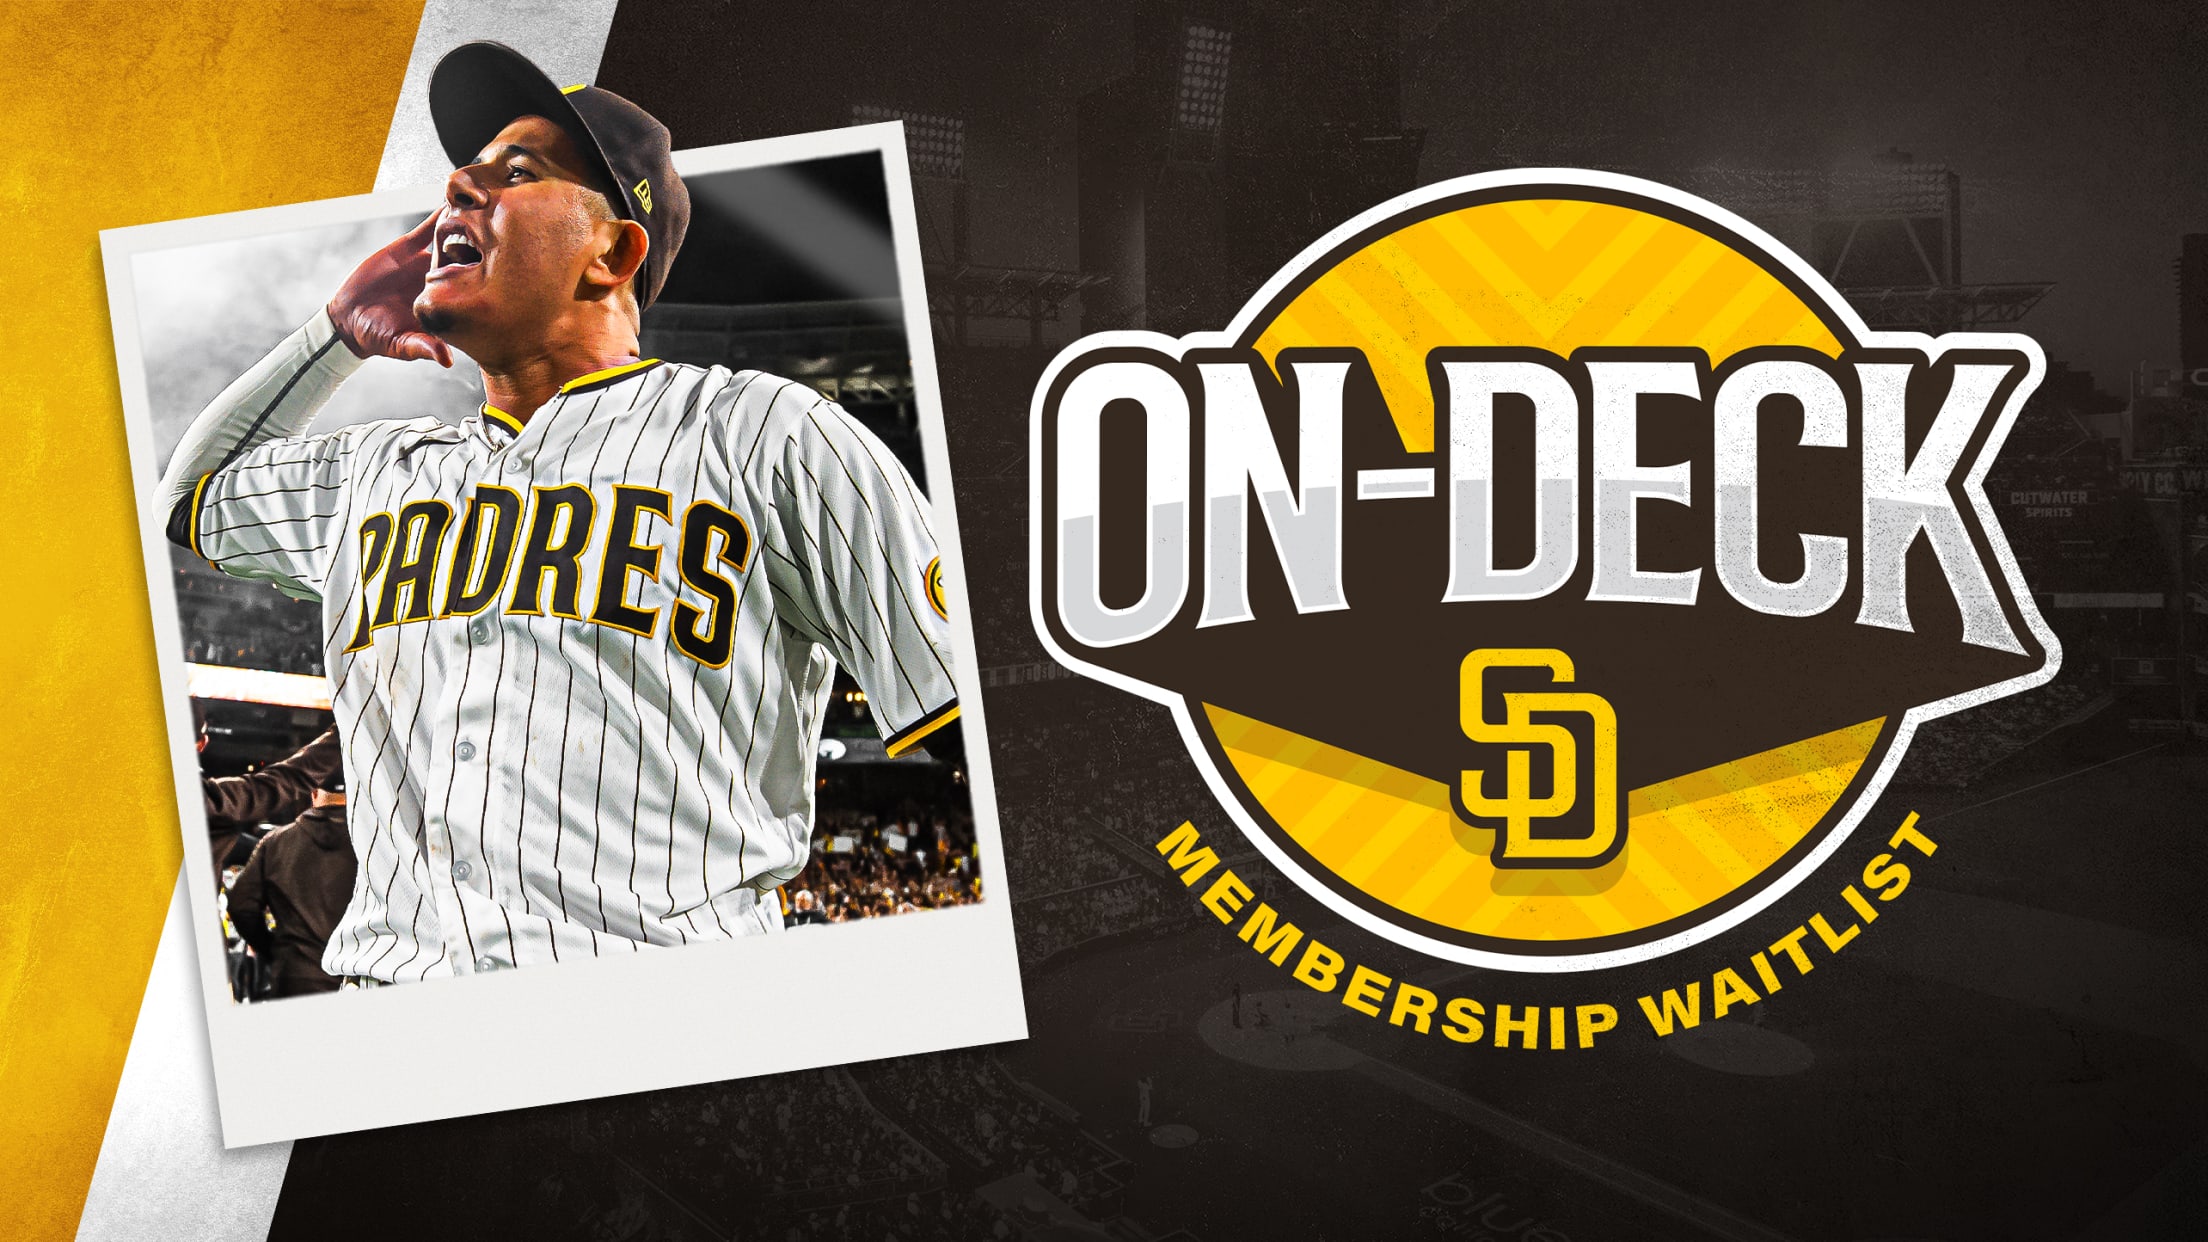 San Diego Padres - What's the best way to spend your #FriarFriday? By  gaining priority ticket access to the 2021 season! 🎟 Request more info:  Padres.com/membershipinfo